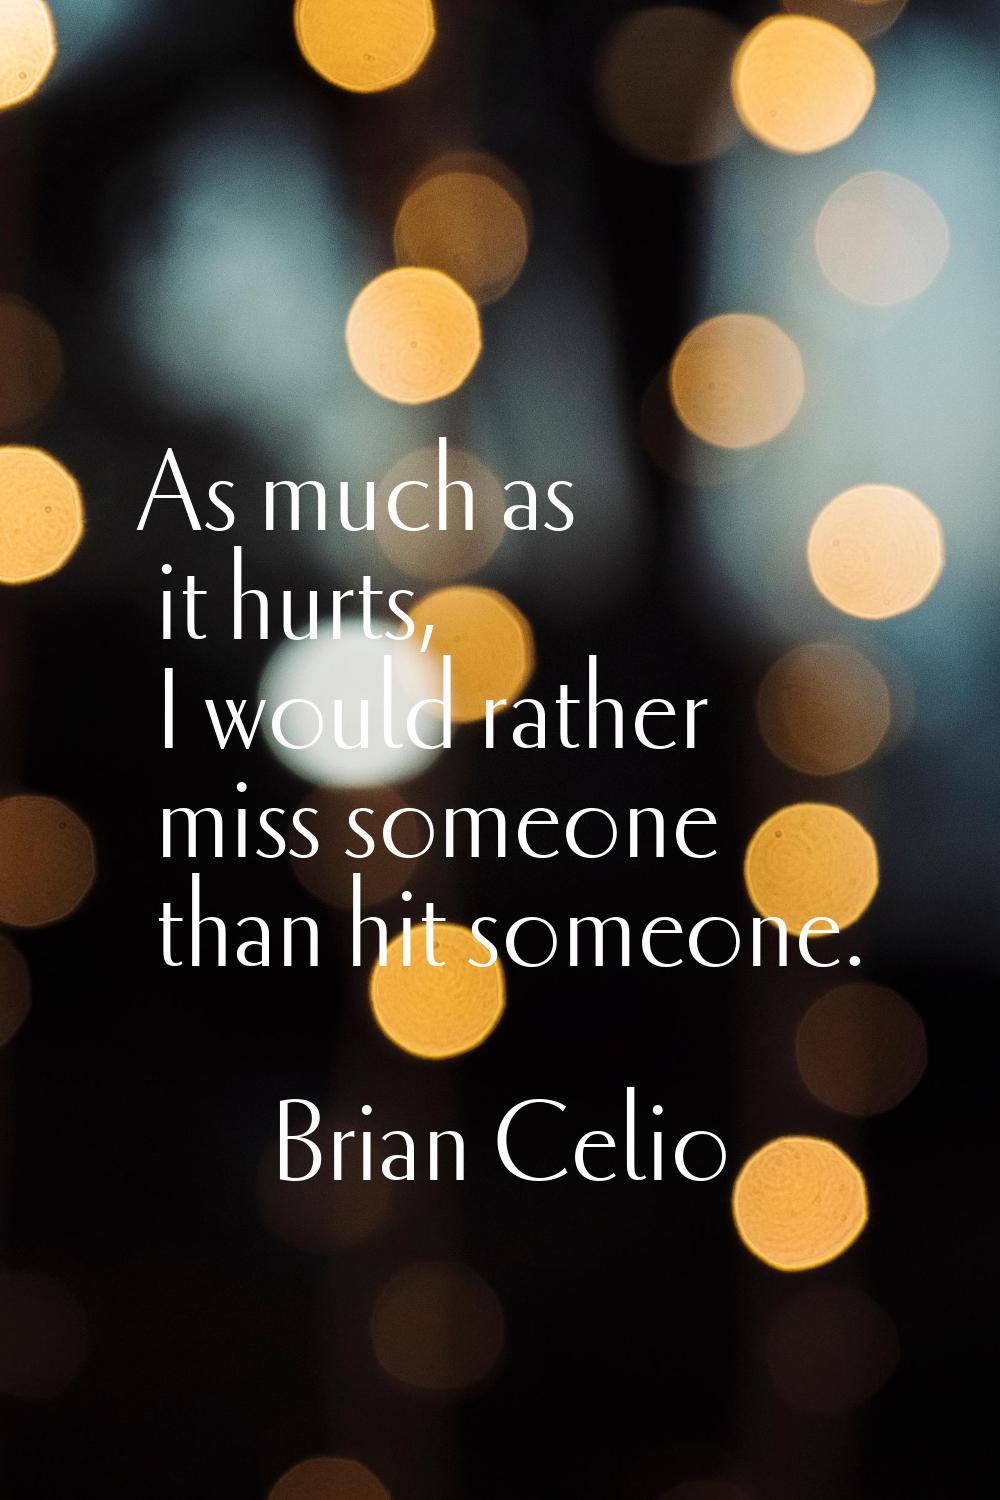 As much as it hurts, I would rather miss someone than hit someone.